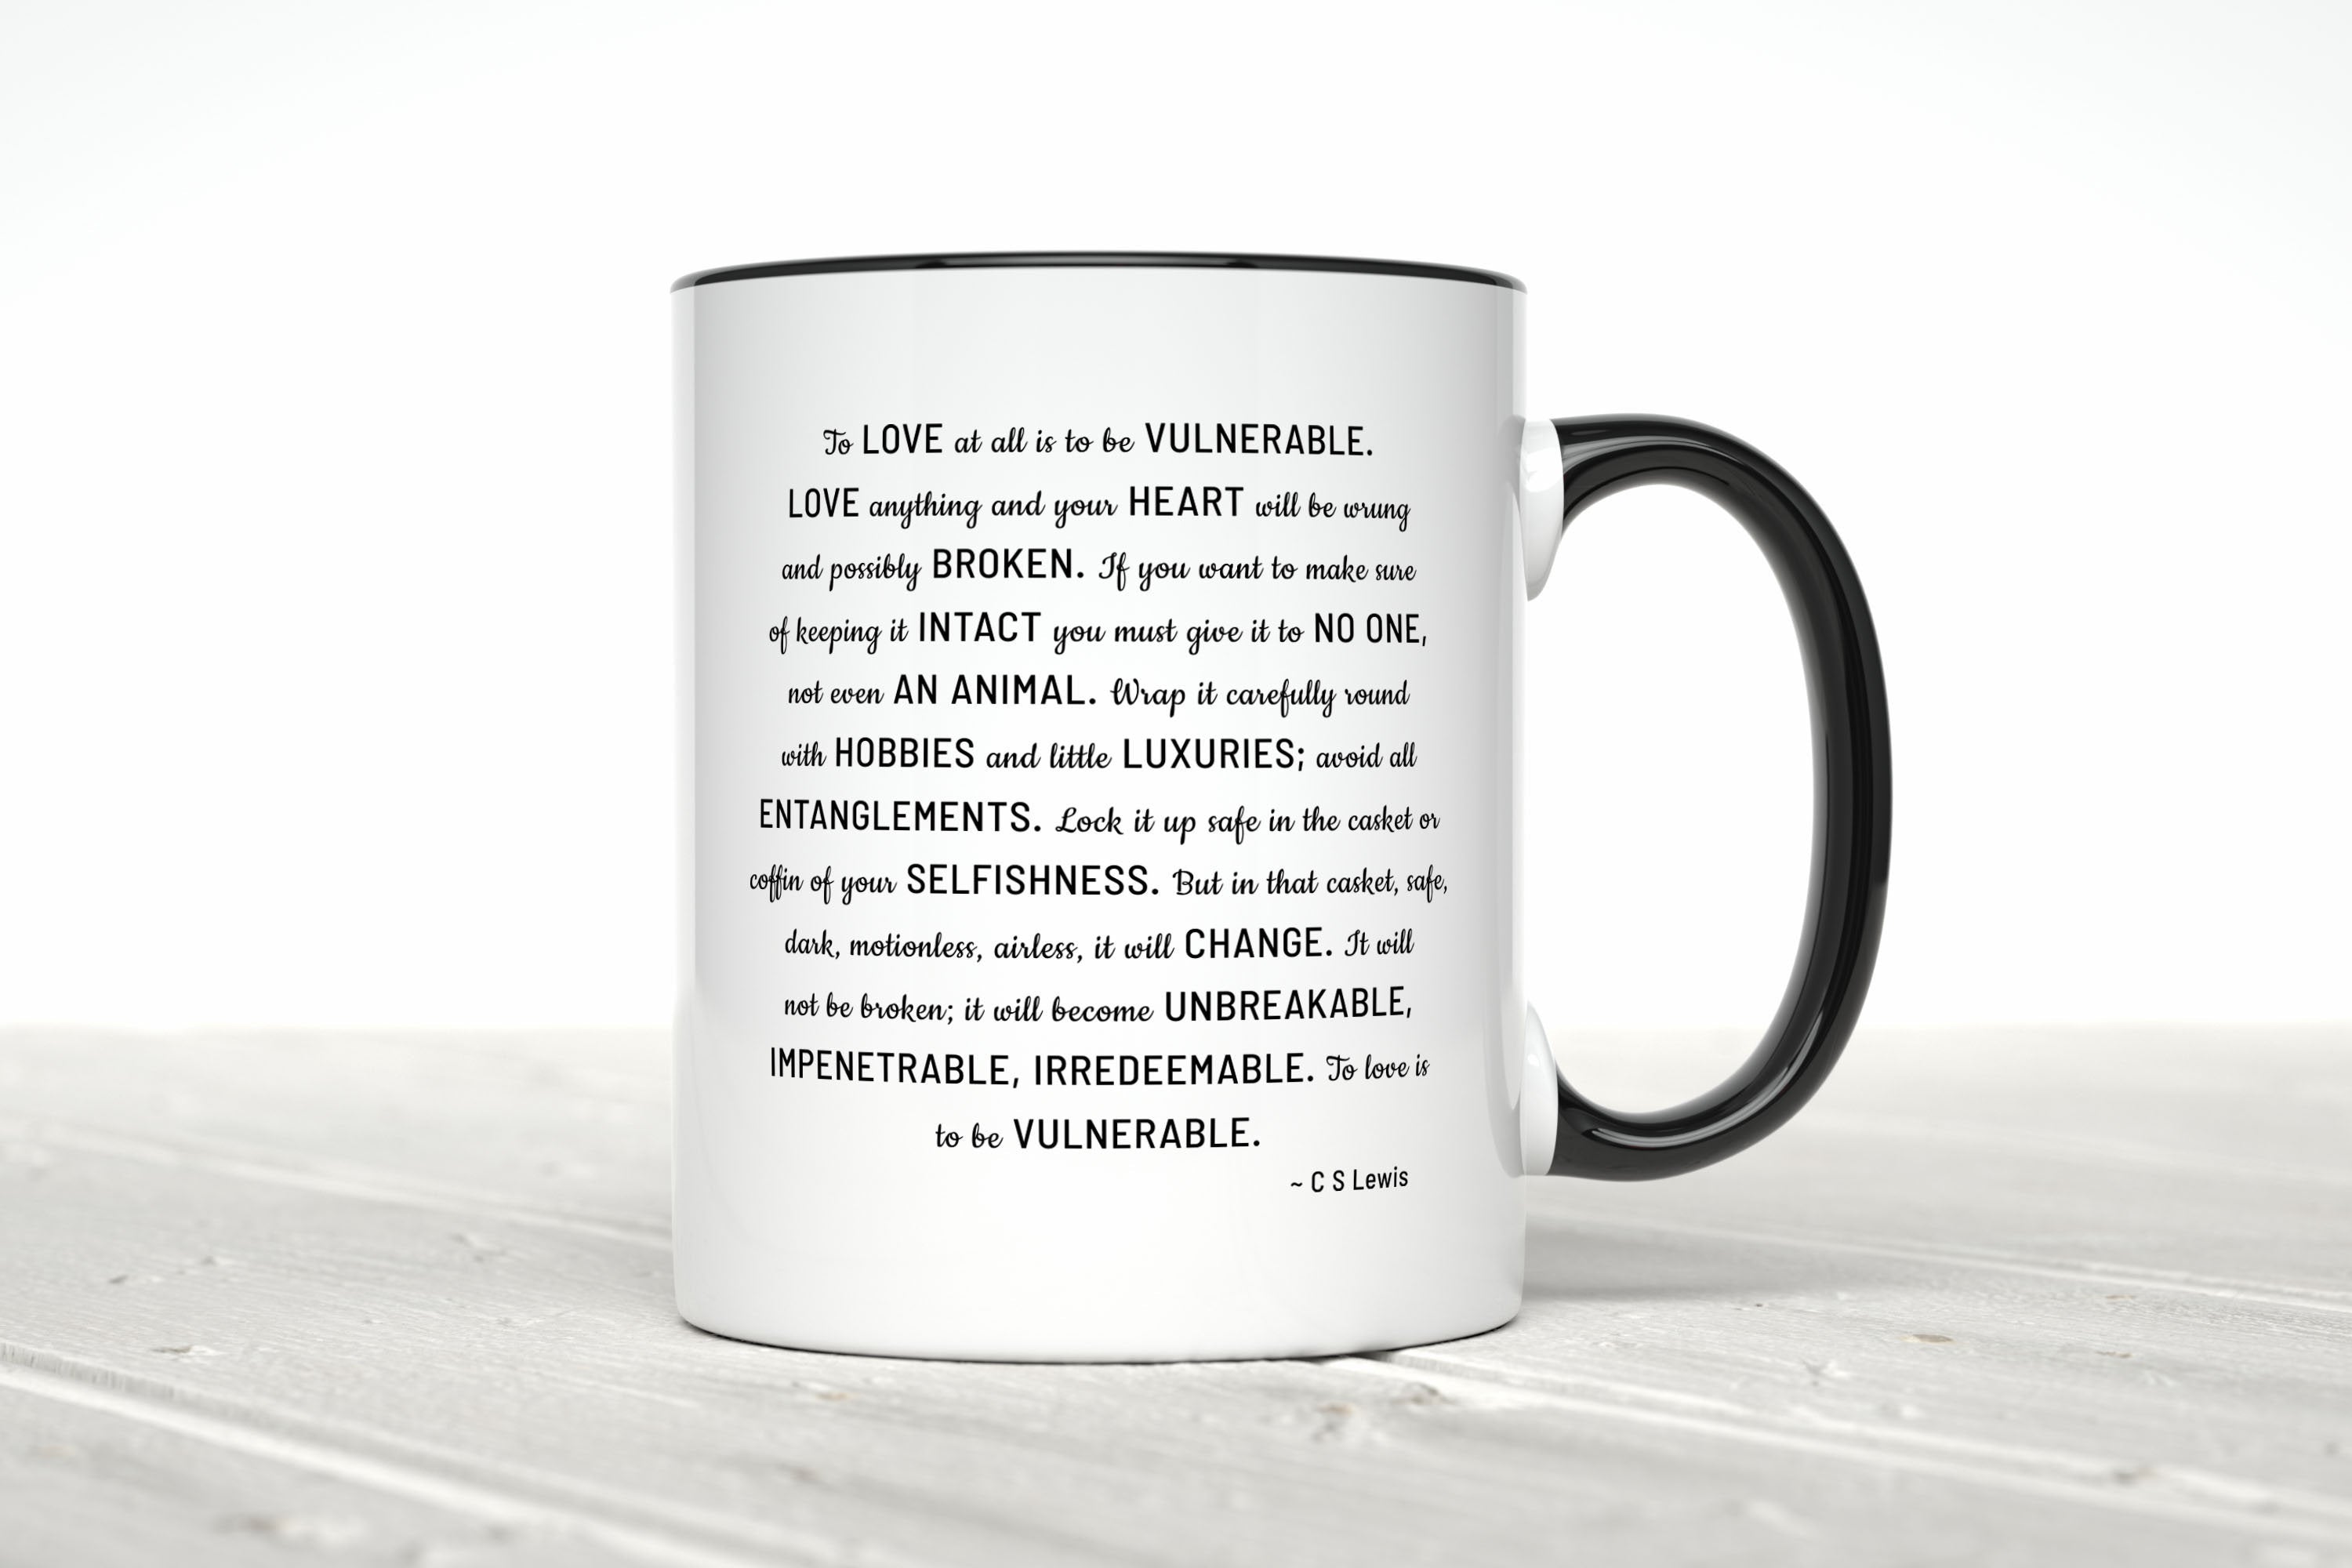 CS Lewis To Love Is To Be Vulnerable, Unique Black & White Coffee Mug Gift For Her, Large Tea Mug with Love Quote